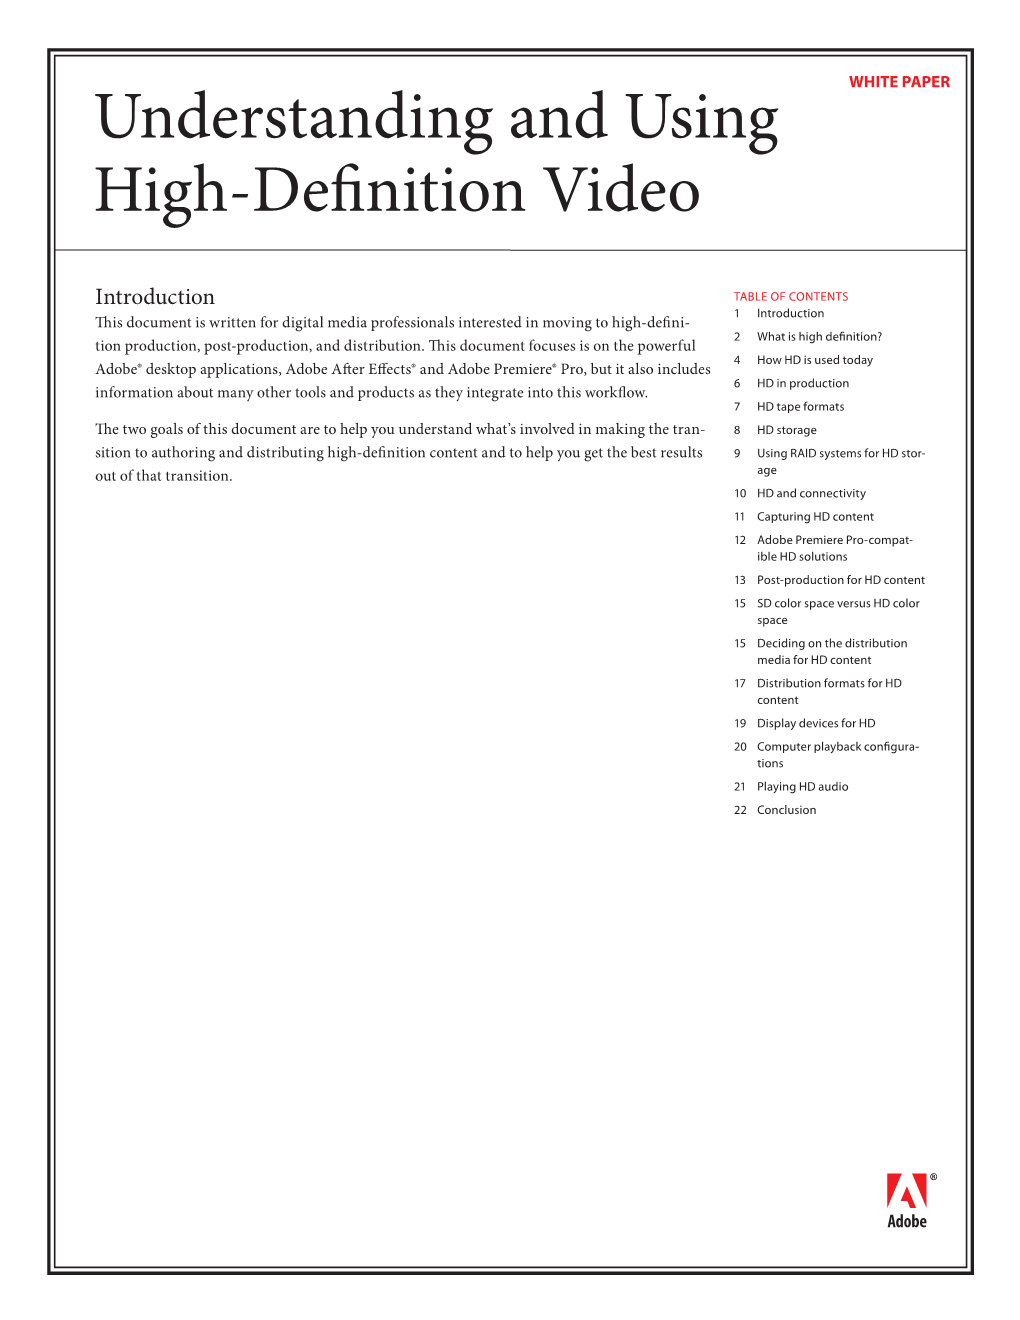 Understanding and Using High-Definition Video